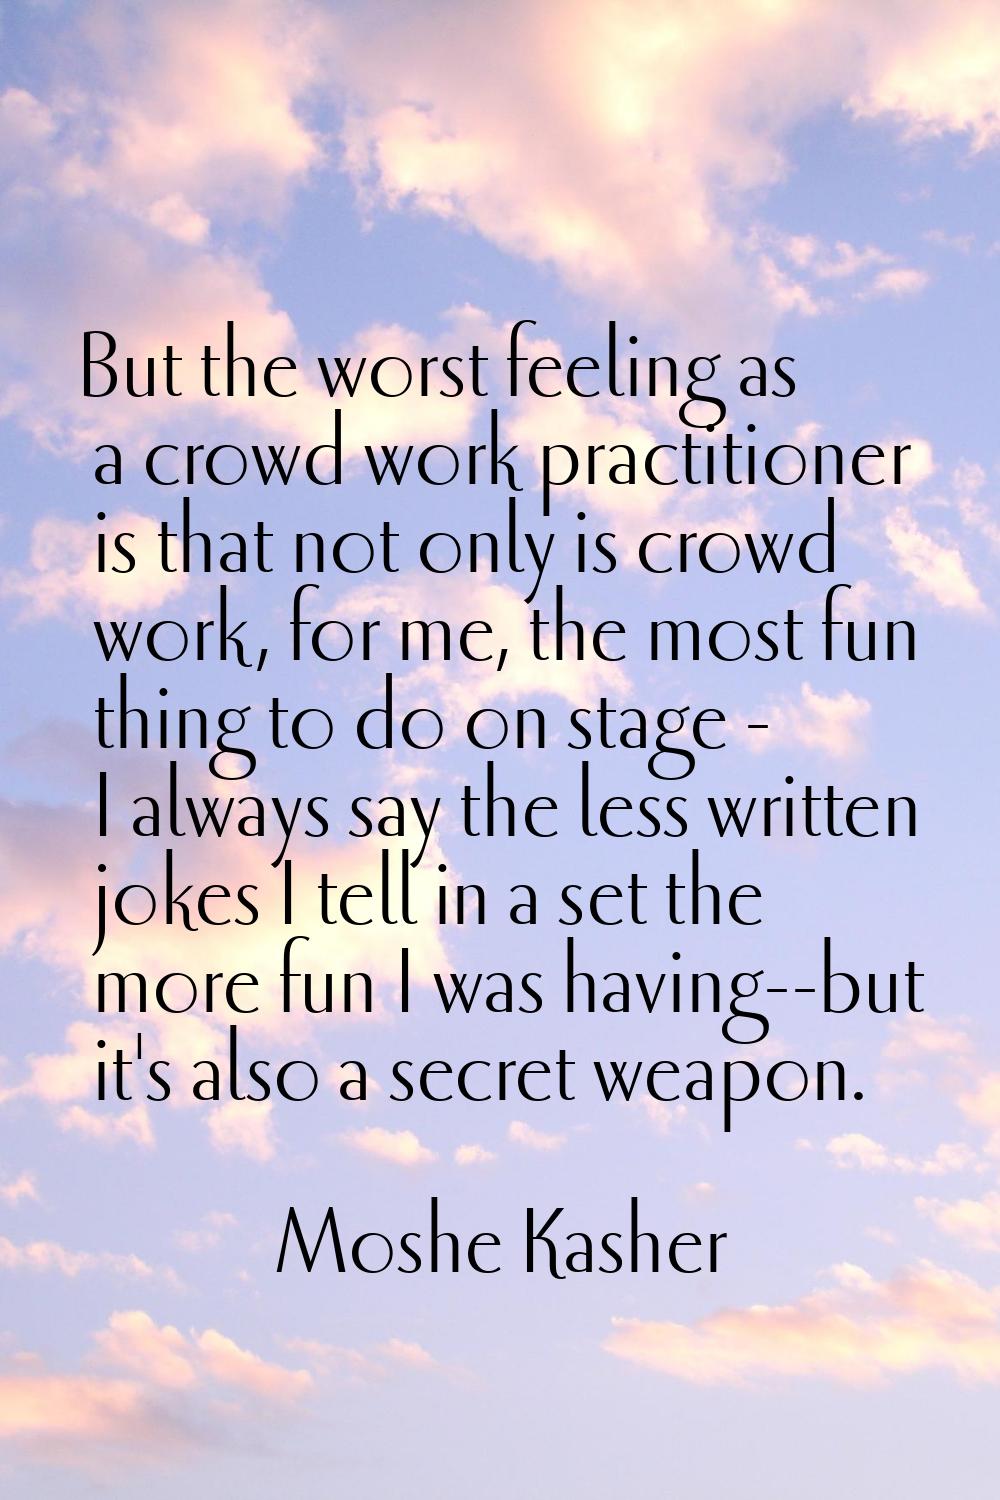 But the worst feeling as a crowd work practitioner is that not only is crowd work, for me, the most